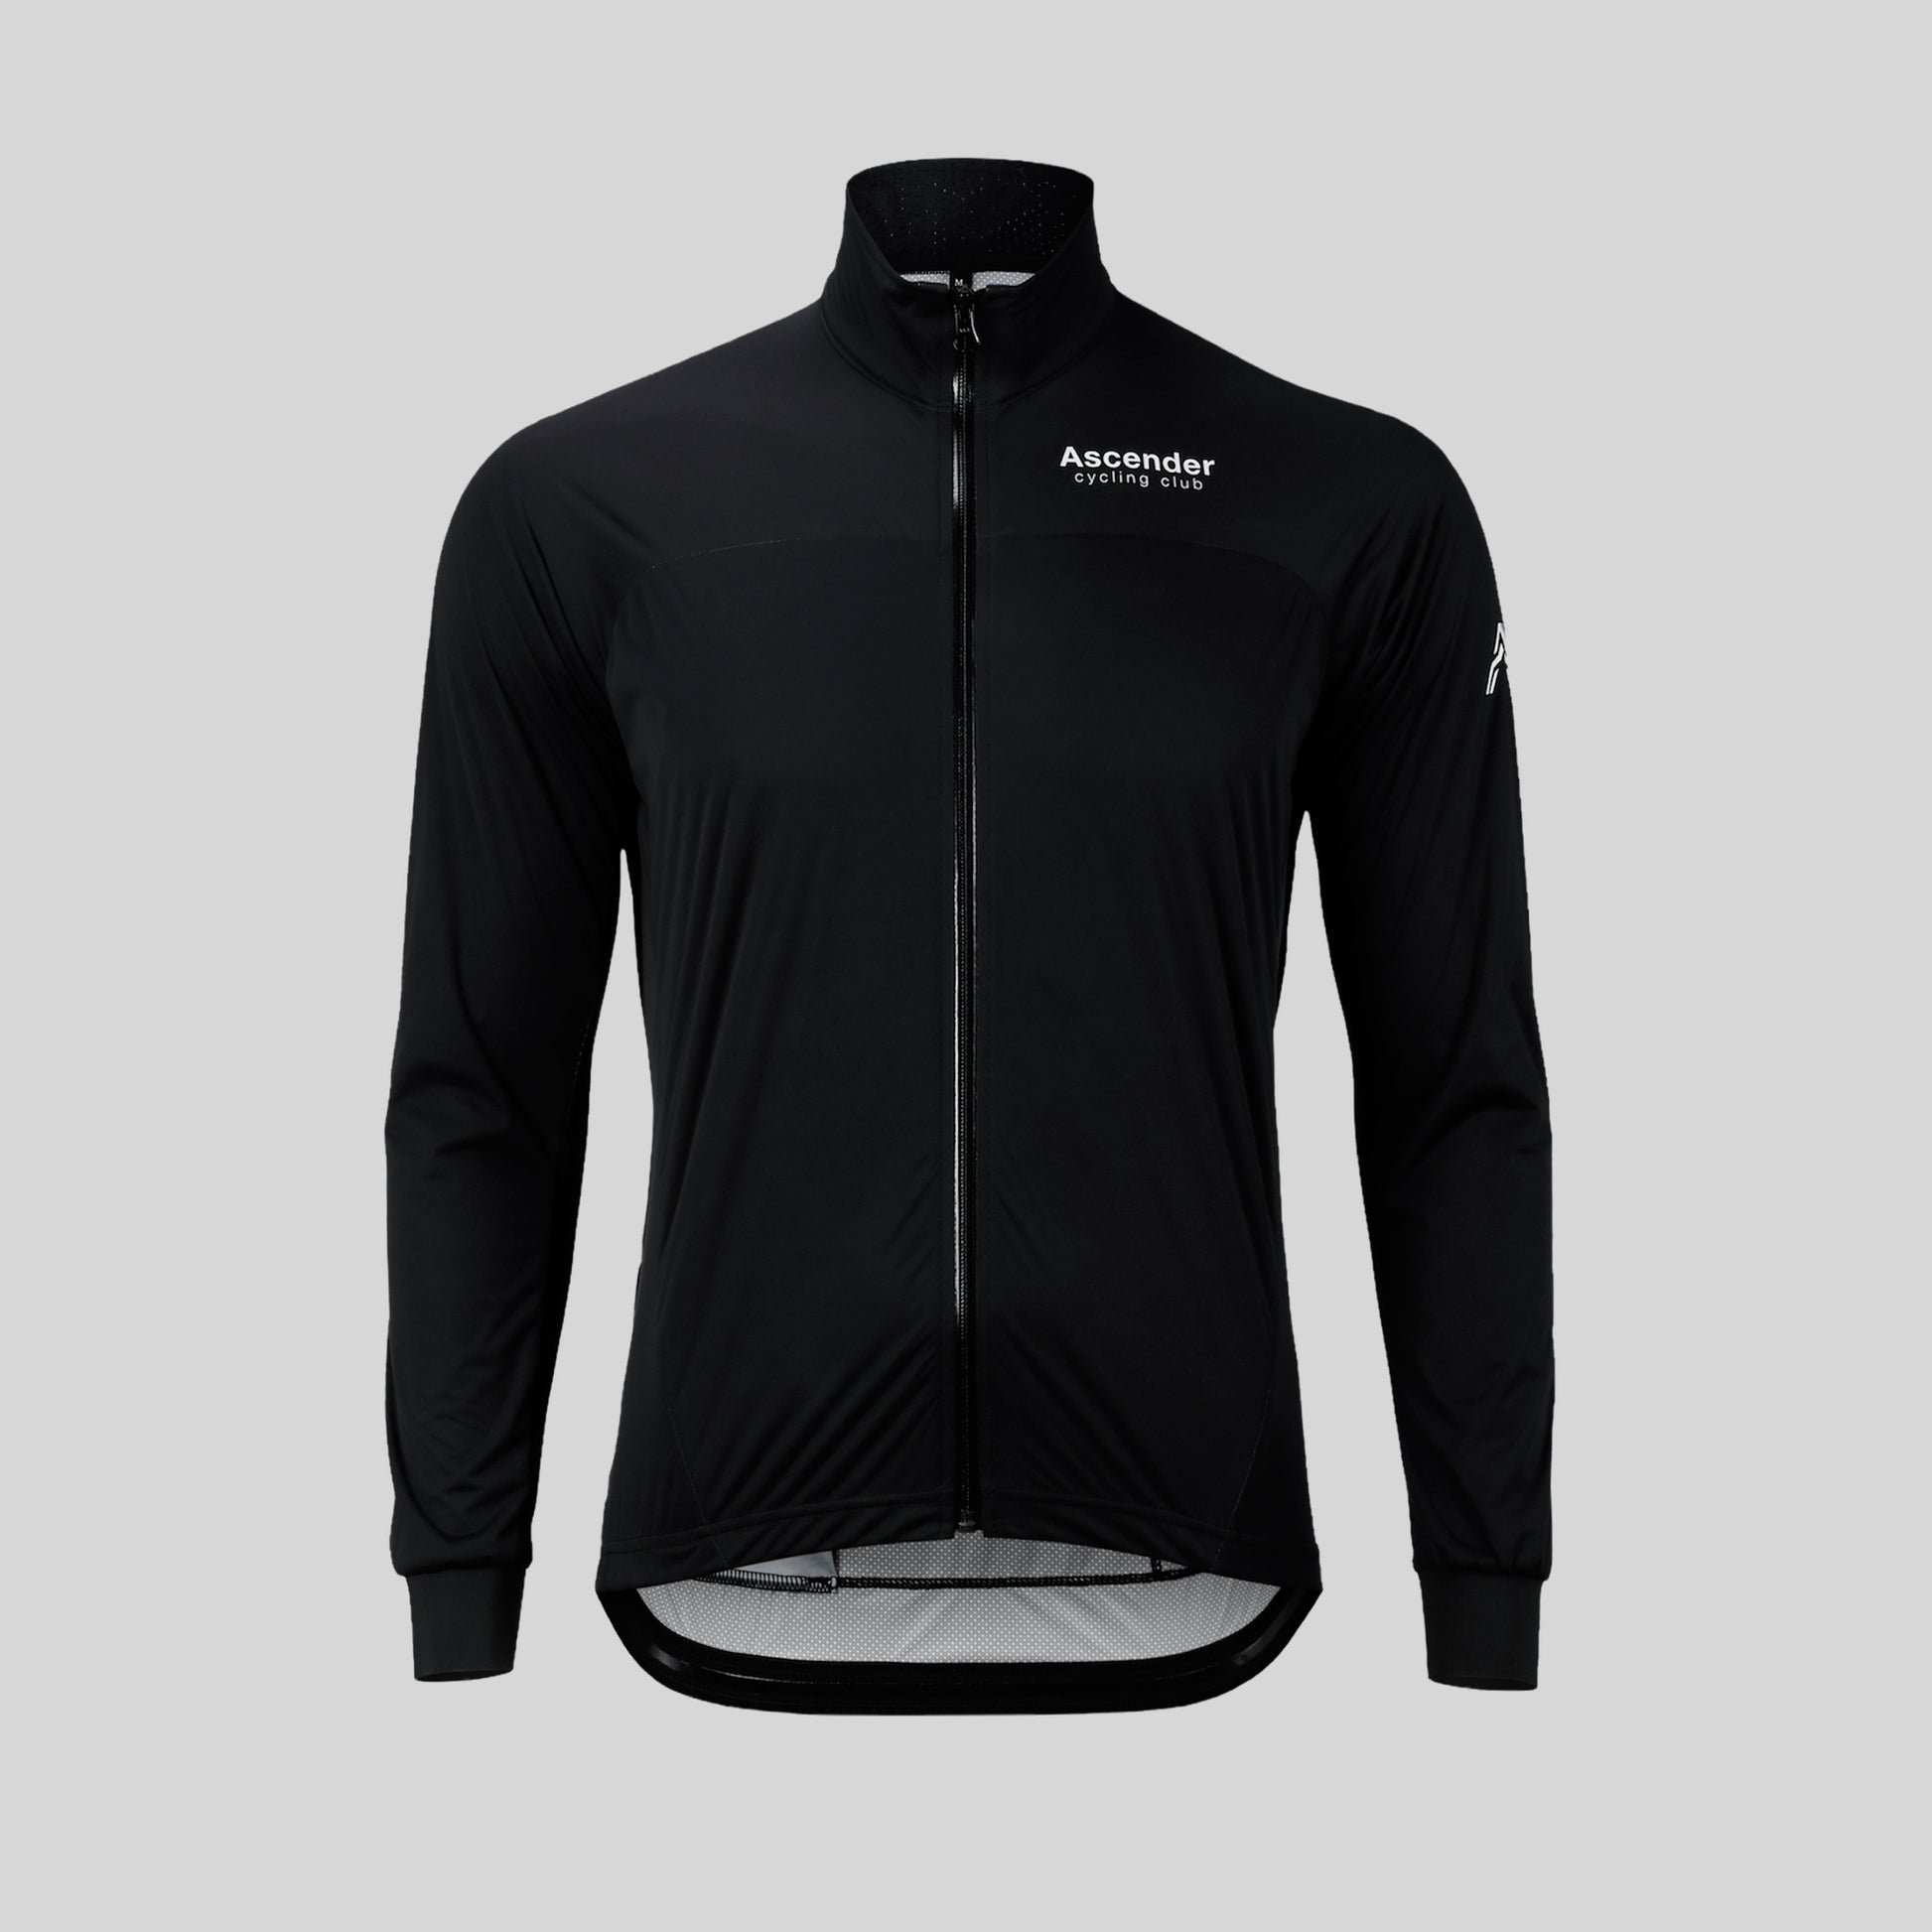  Aquarius Windproof and Waterproof Shield Jacket from Ascender Cycling Club in Zürich Switzerland Front View